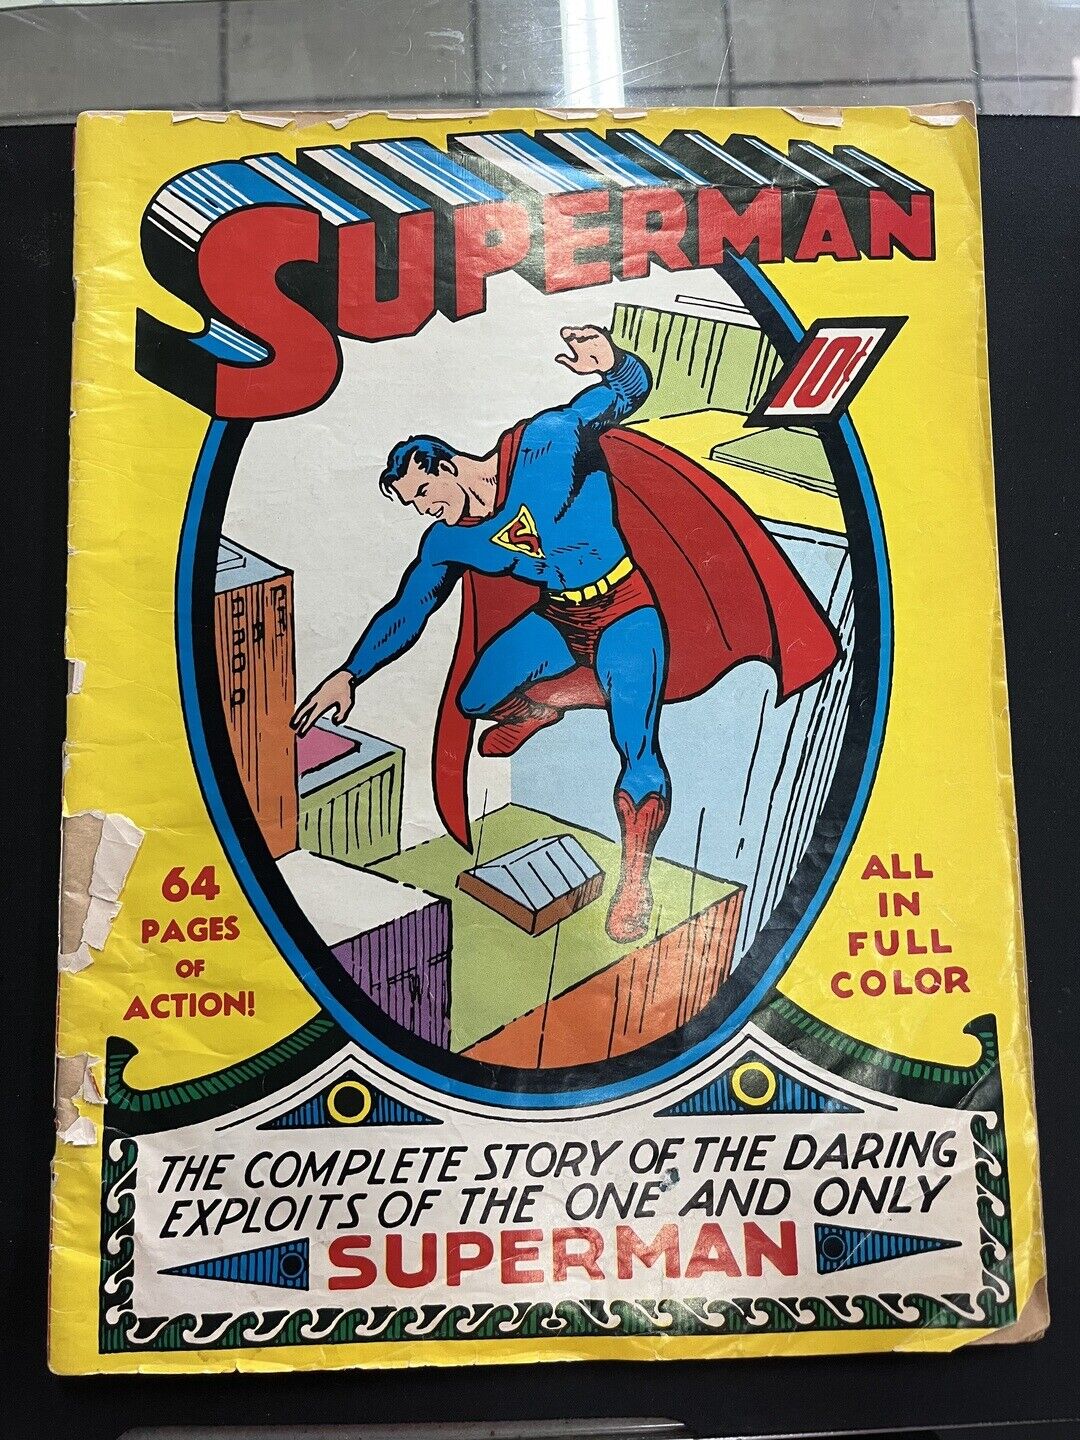 Superman #1 1939 64 Pages of Action Large Format Low Grade